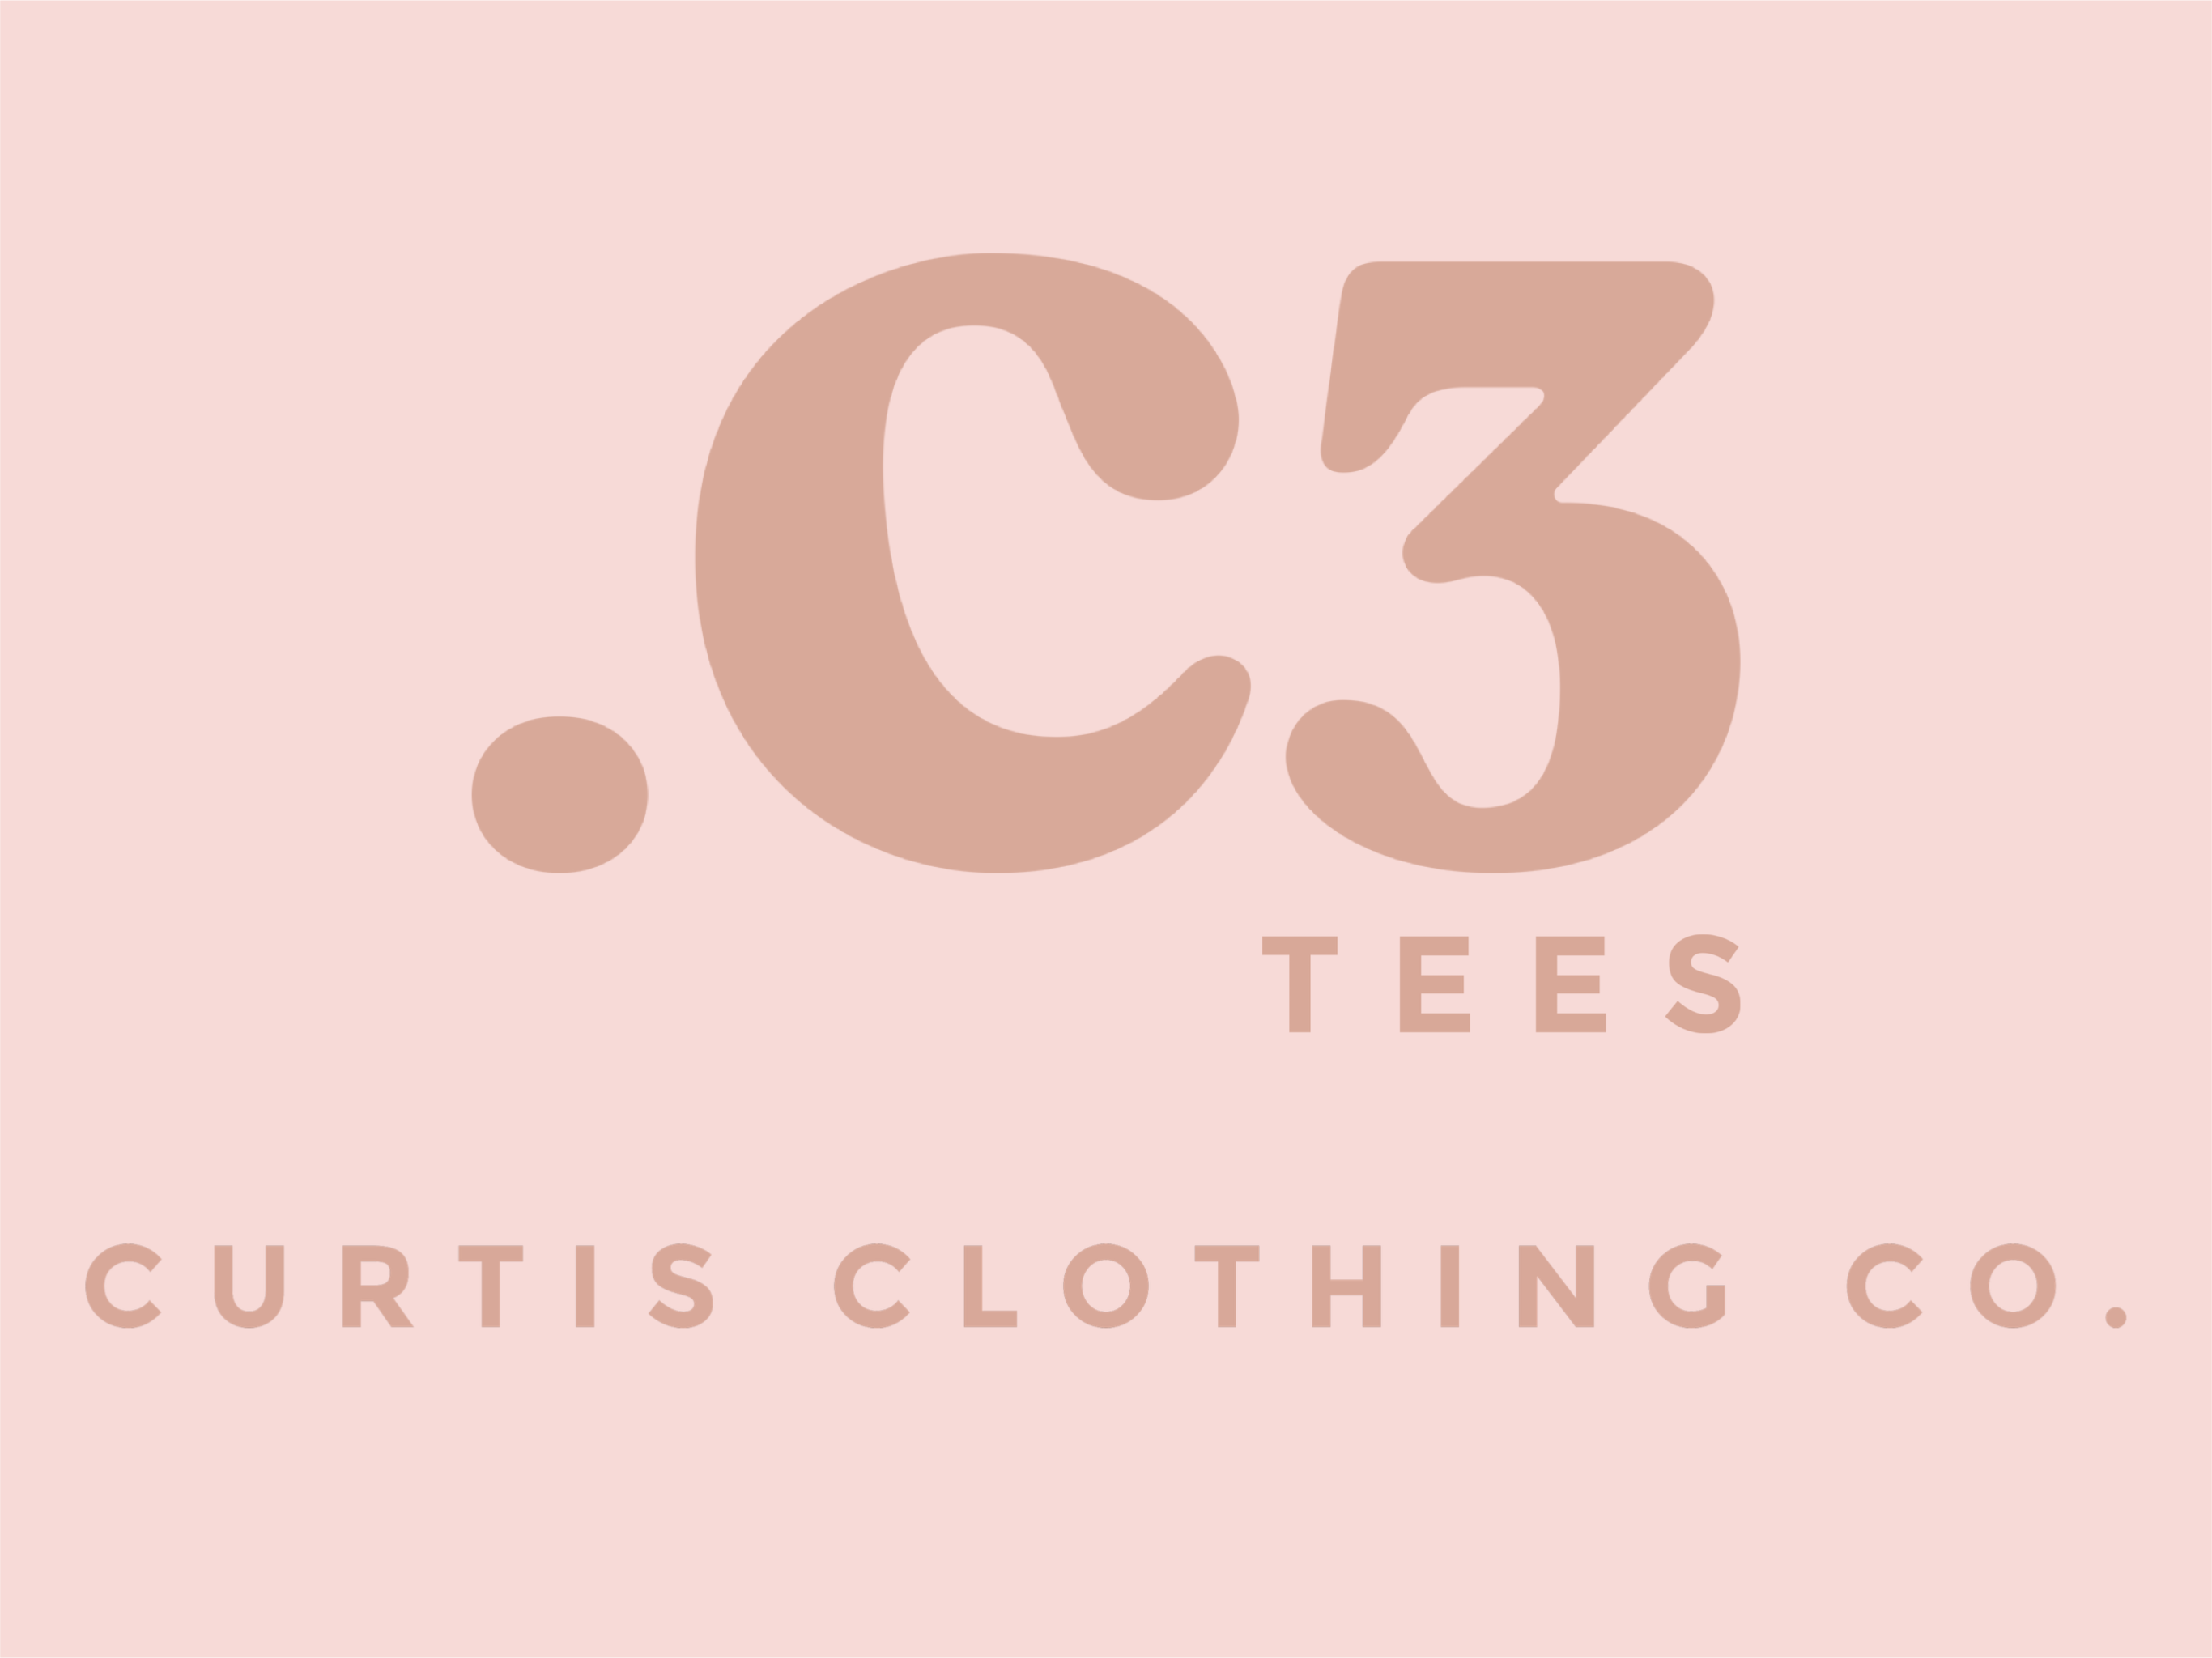 C3 - Curtis Clothing Co.